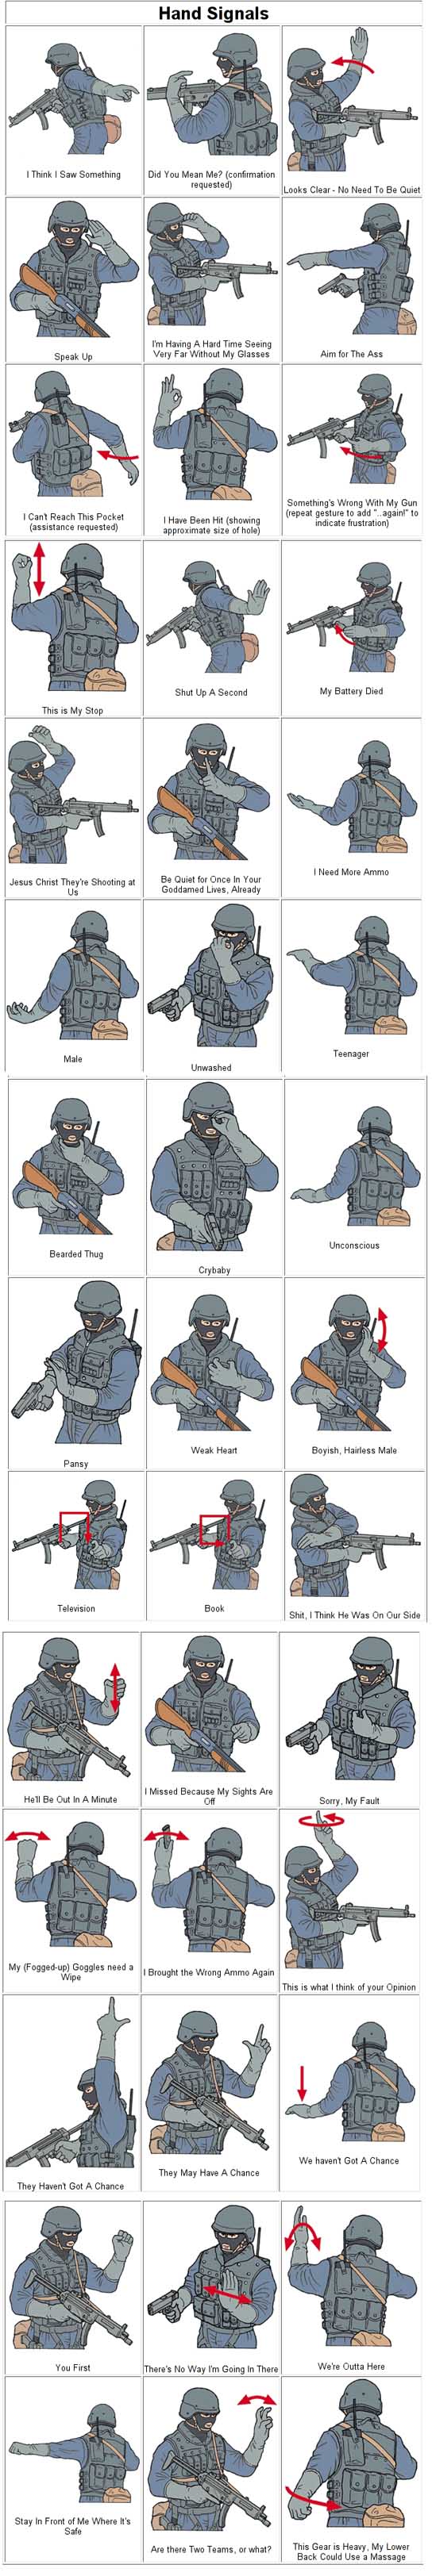 Army Hand Signals